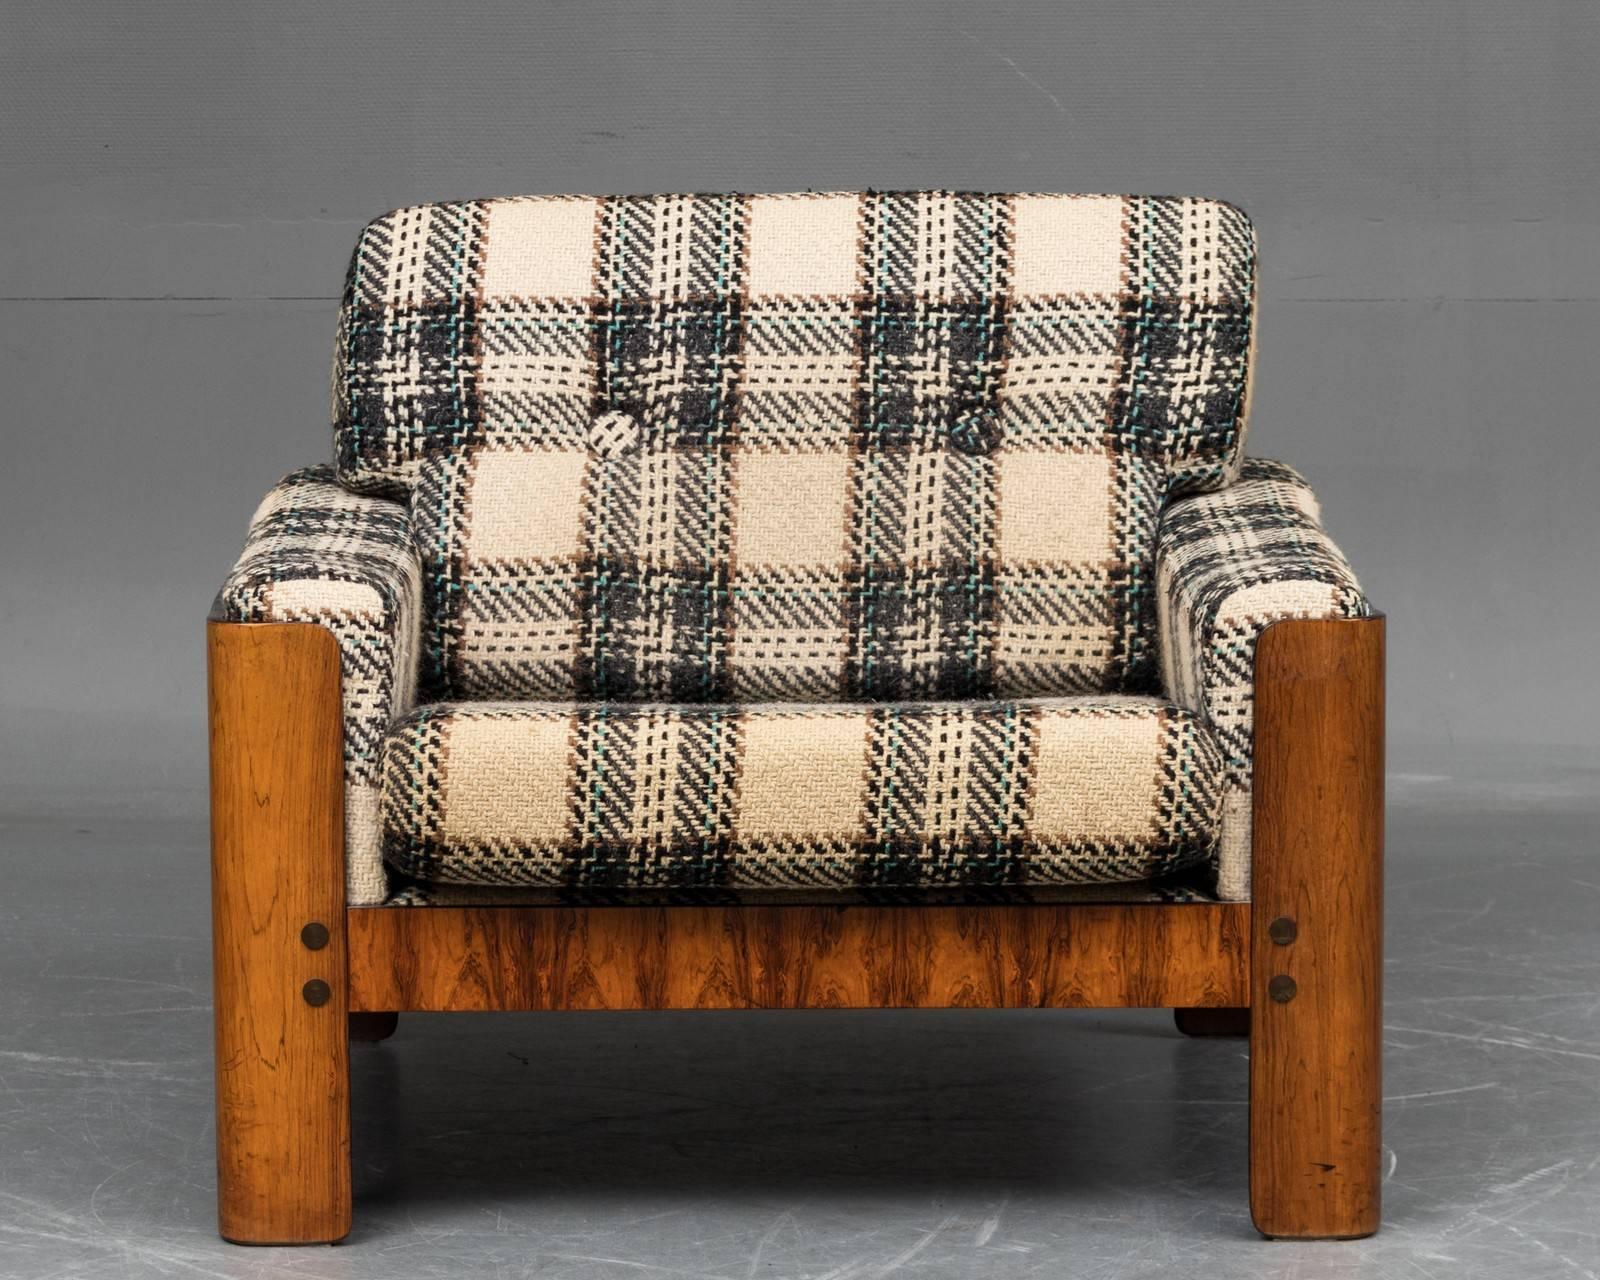 Very charming and rare easy chair attributed to Designer Arne Wahl Iversen for Komfort Mobler of Denmark, circa 1970. Nice wool covered cushions showing minimal wear in a time typical checkered pattern on frames of Brazilian rosewood veneer. The